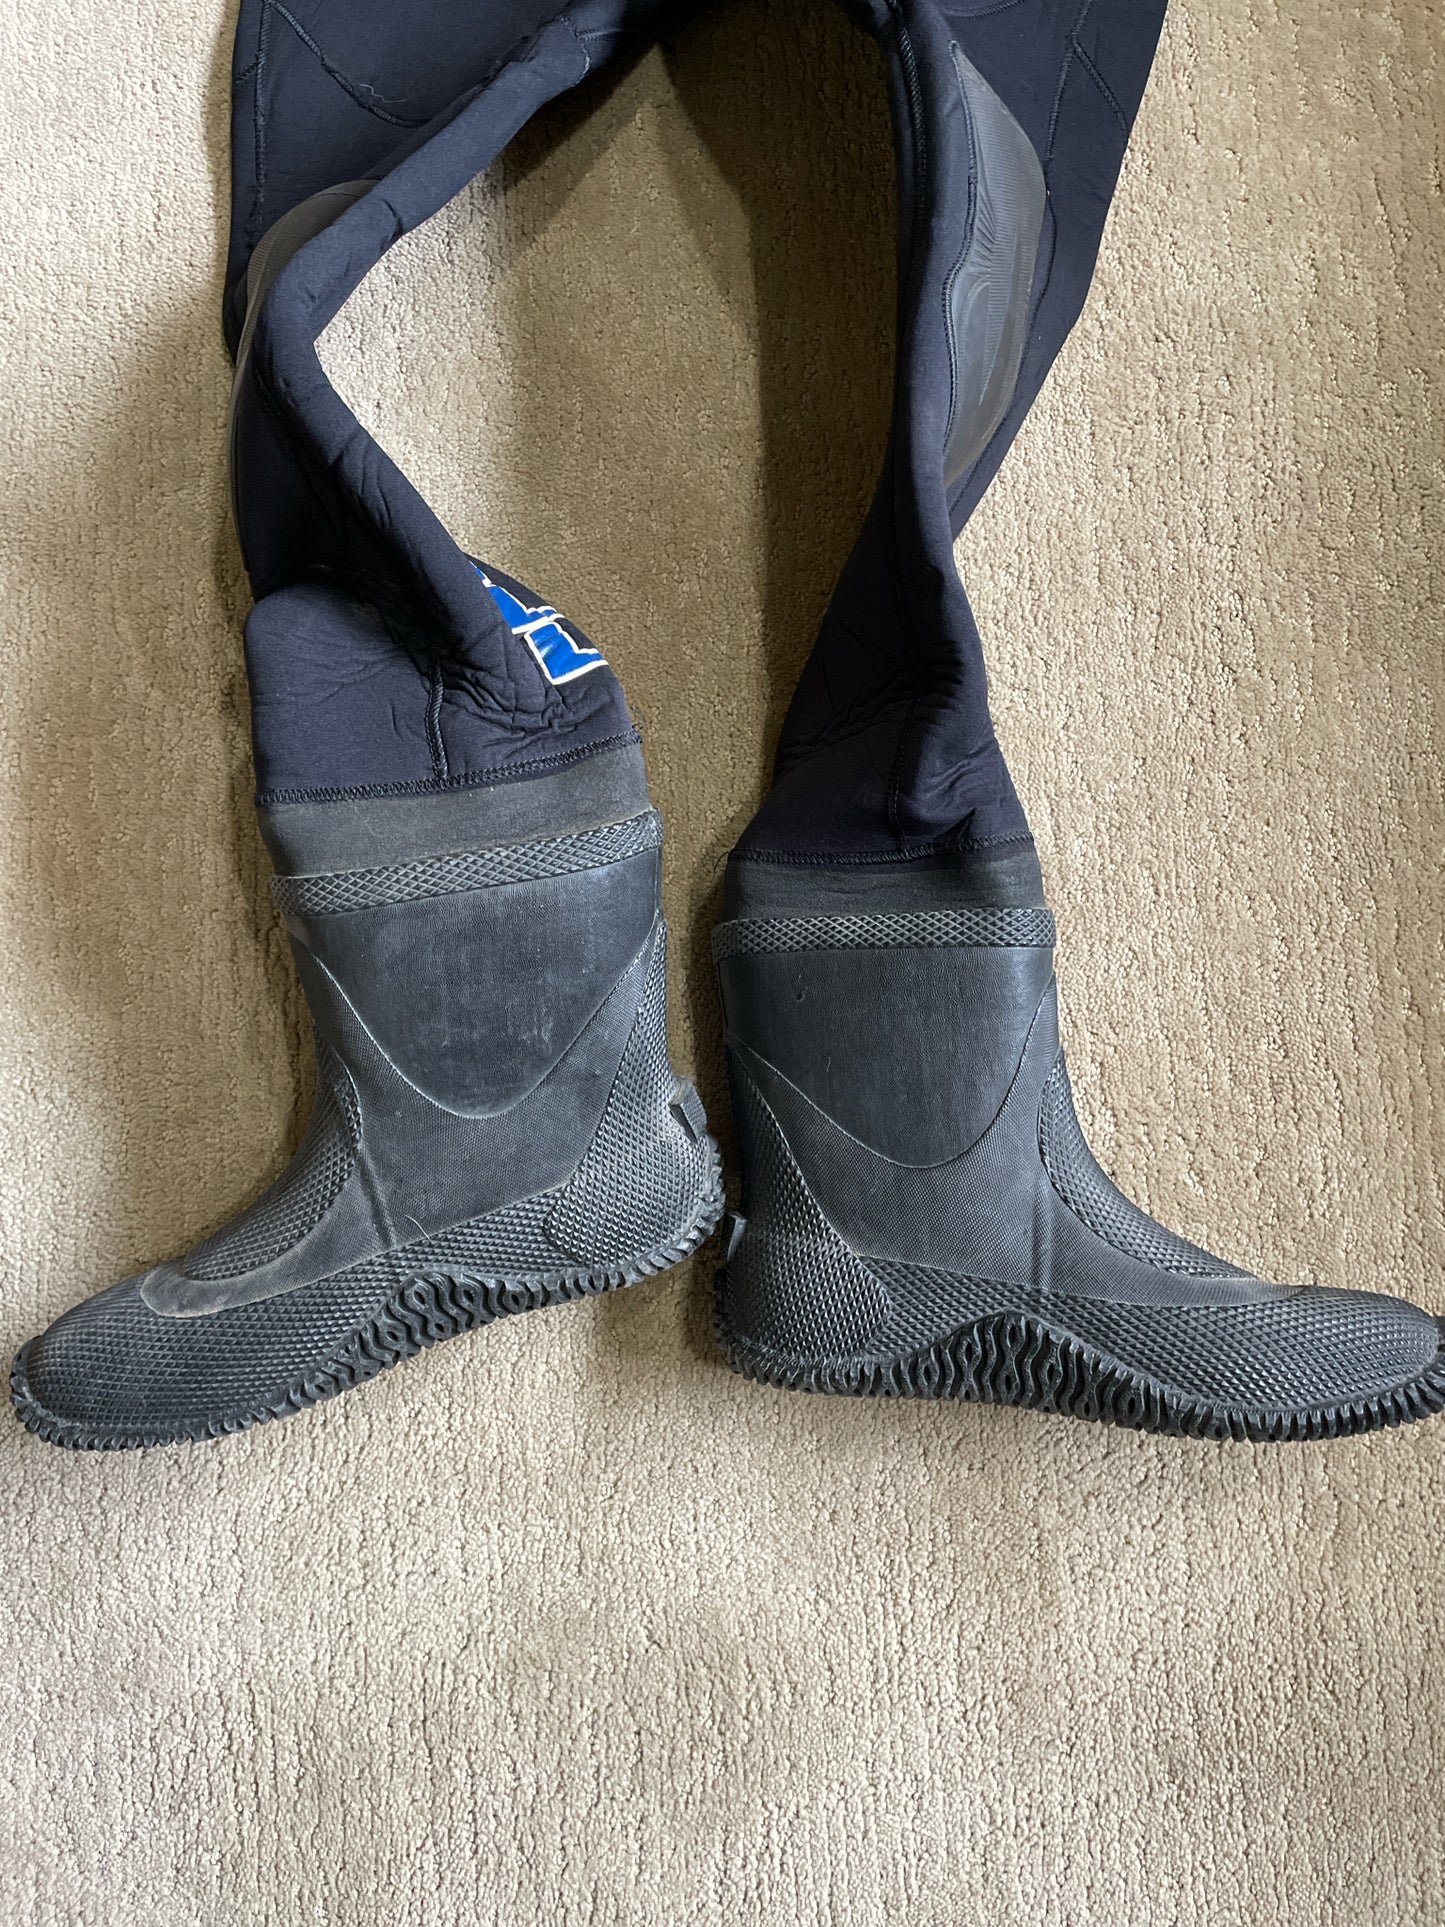 O'Neill Wetsuit w/Boots